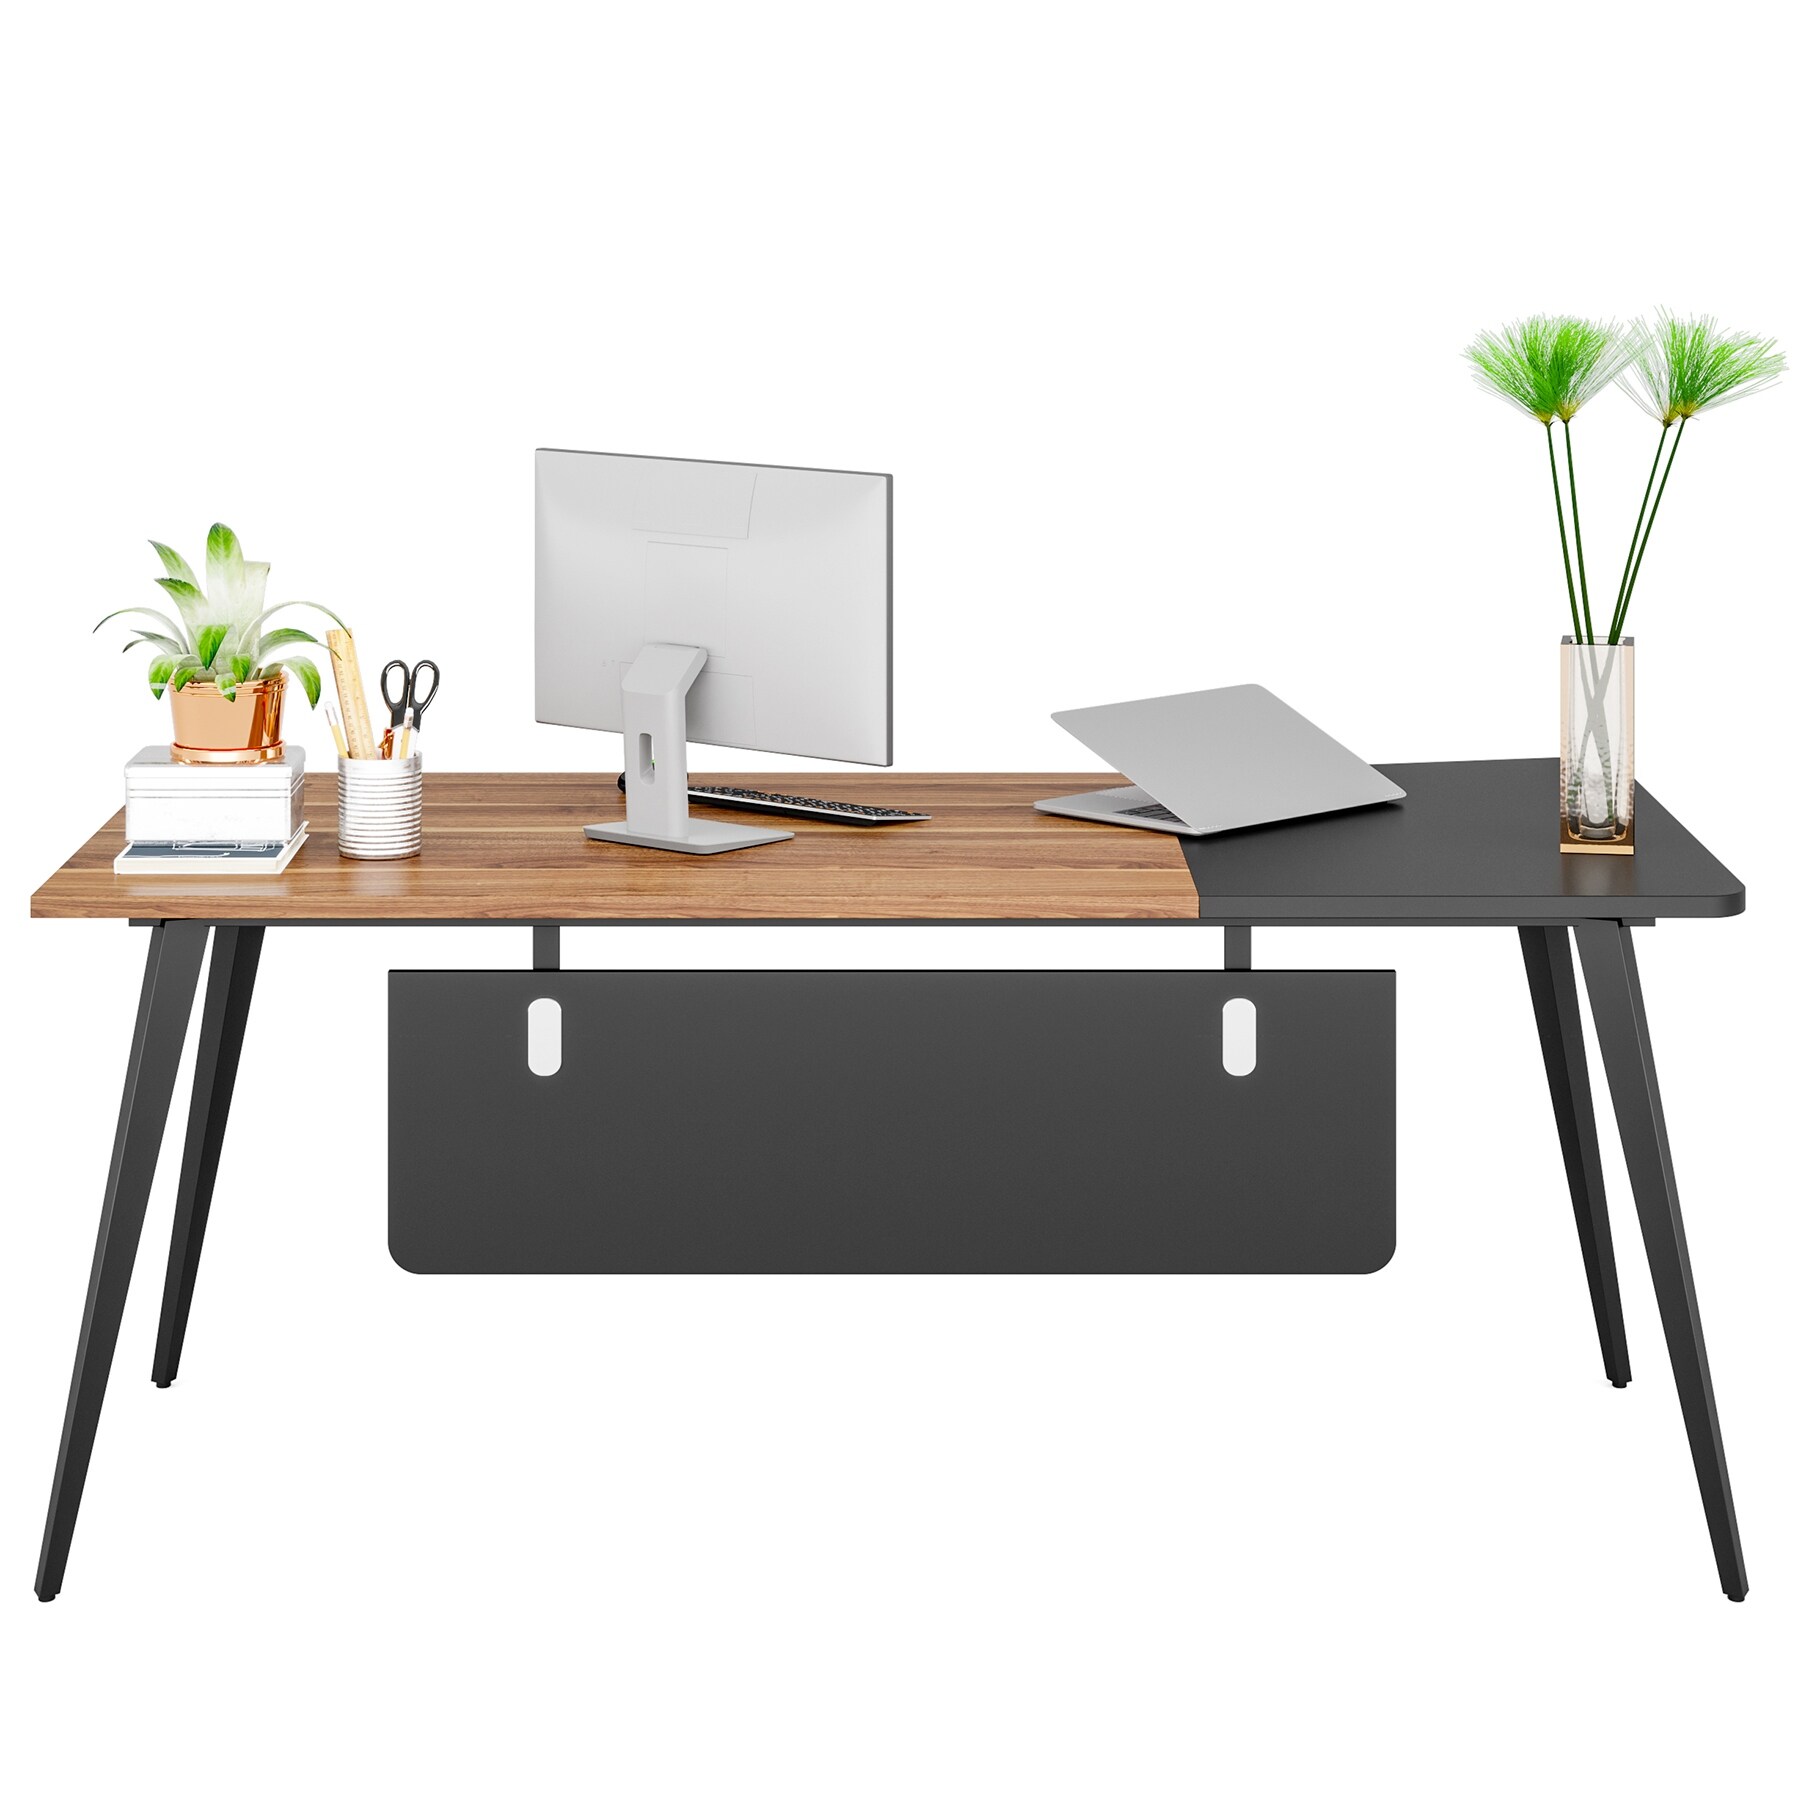 https://ak1.ostkcdn.com/images/products/is/images/direct/53d636c6e71b232120a9e42670f6443f8a967ed4/Large-Computer-Desk-70-Inch-Executive-Office-Desk-Modern-Simple-Home-Office-Desk.jpg